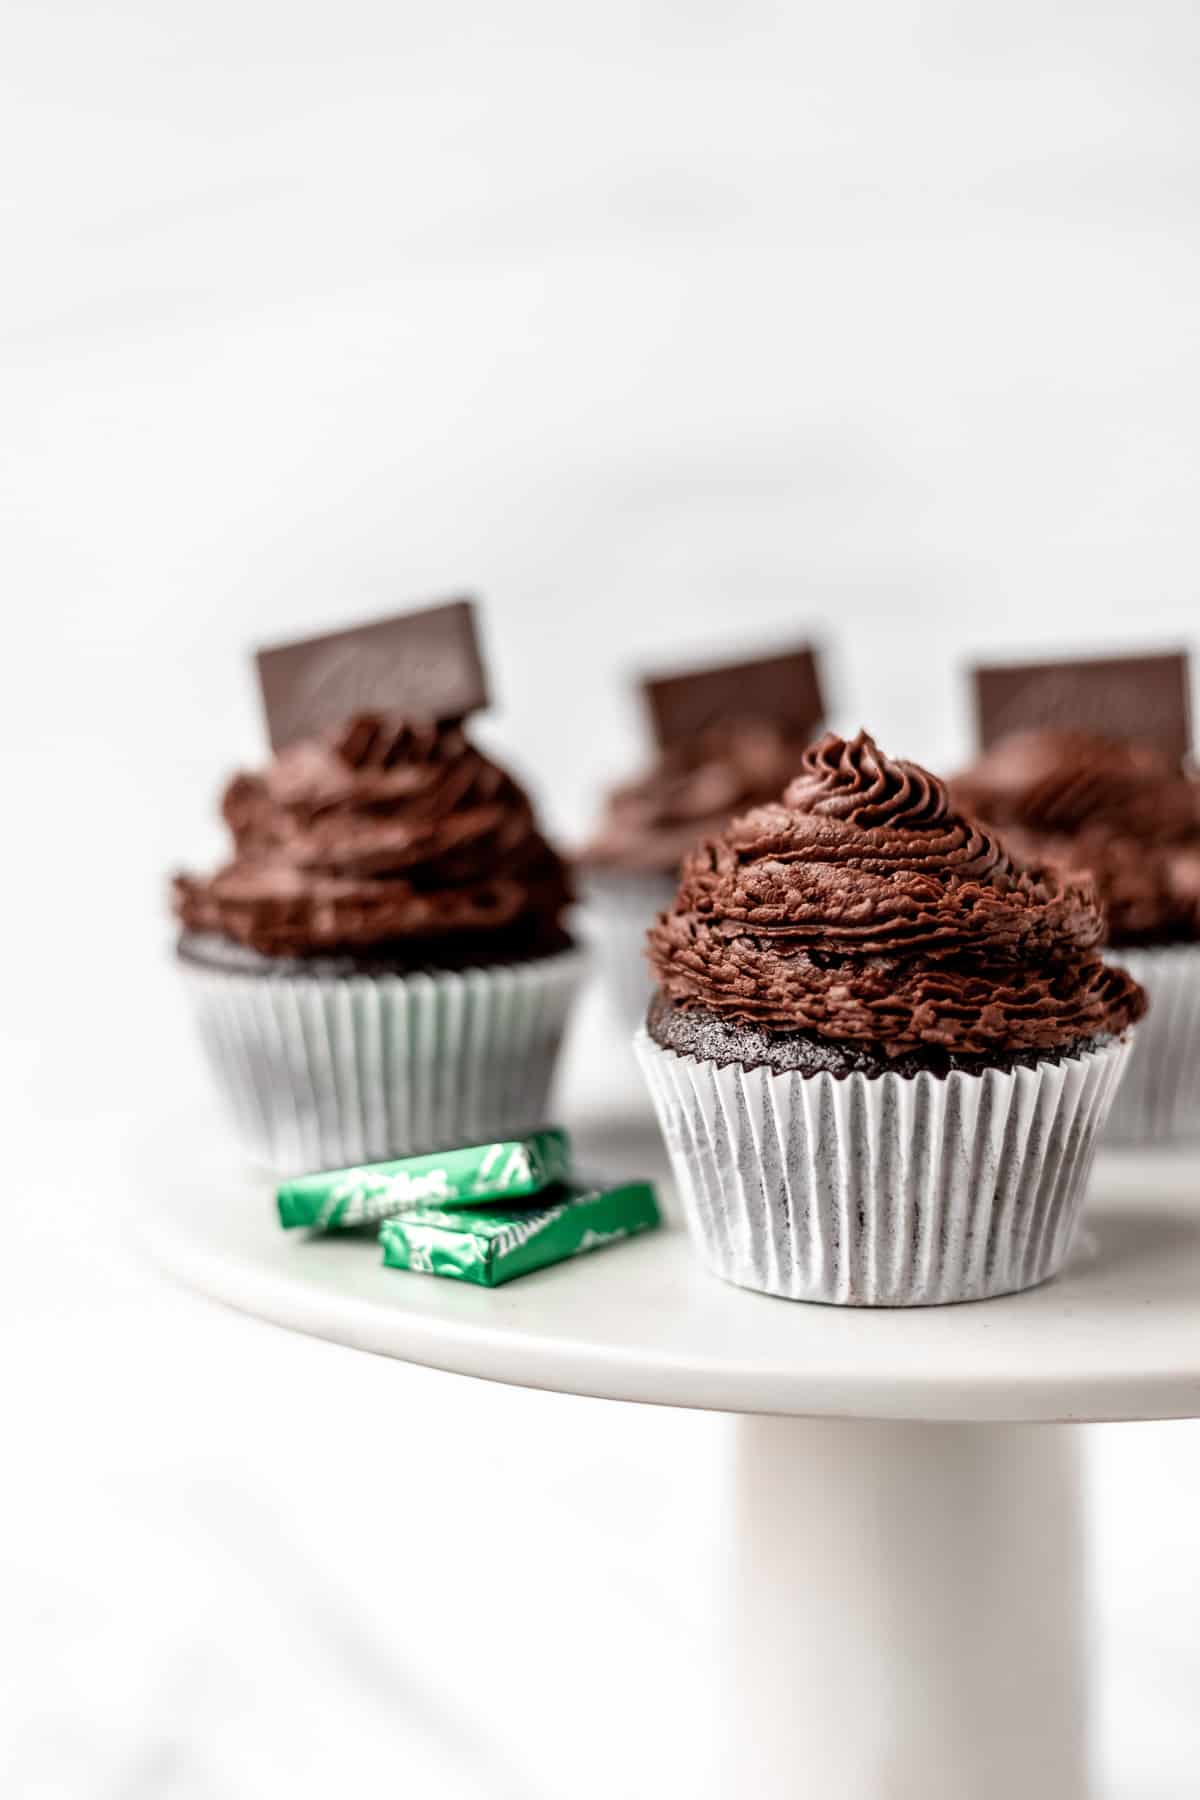 A cake stand with Chocolate Mint Cupcakes and Andes candies on it.